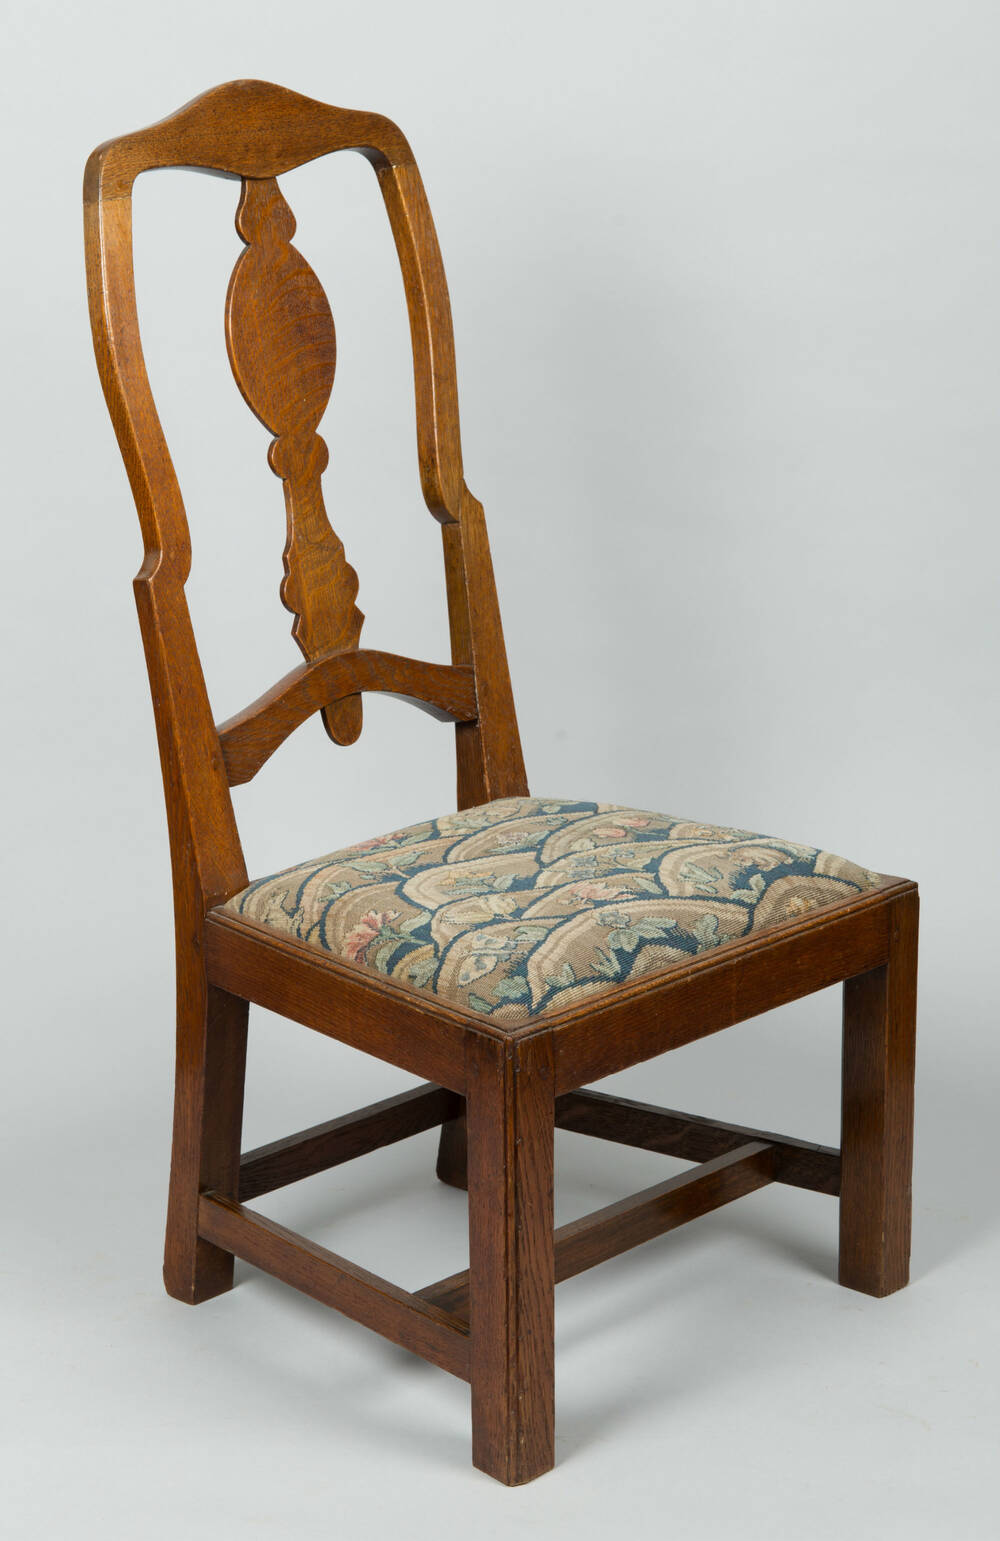 Wooden chair with padded seat, short legs and an open carved back.